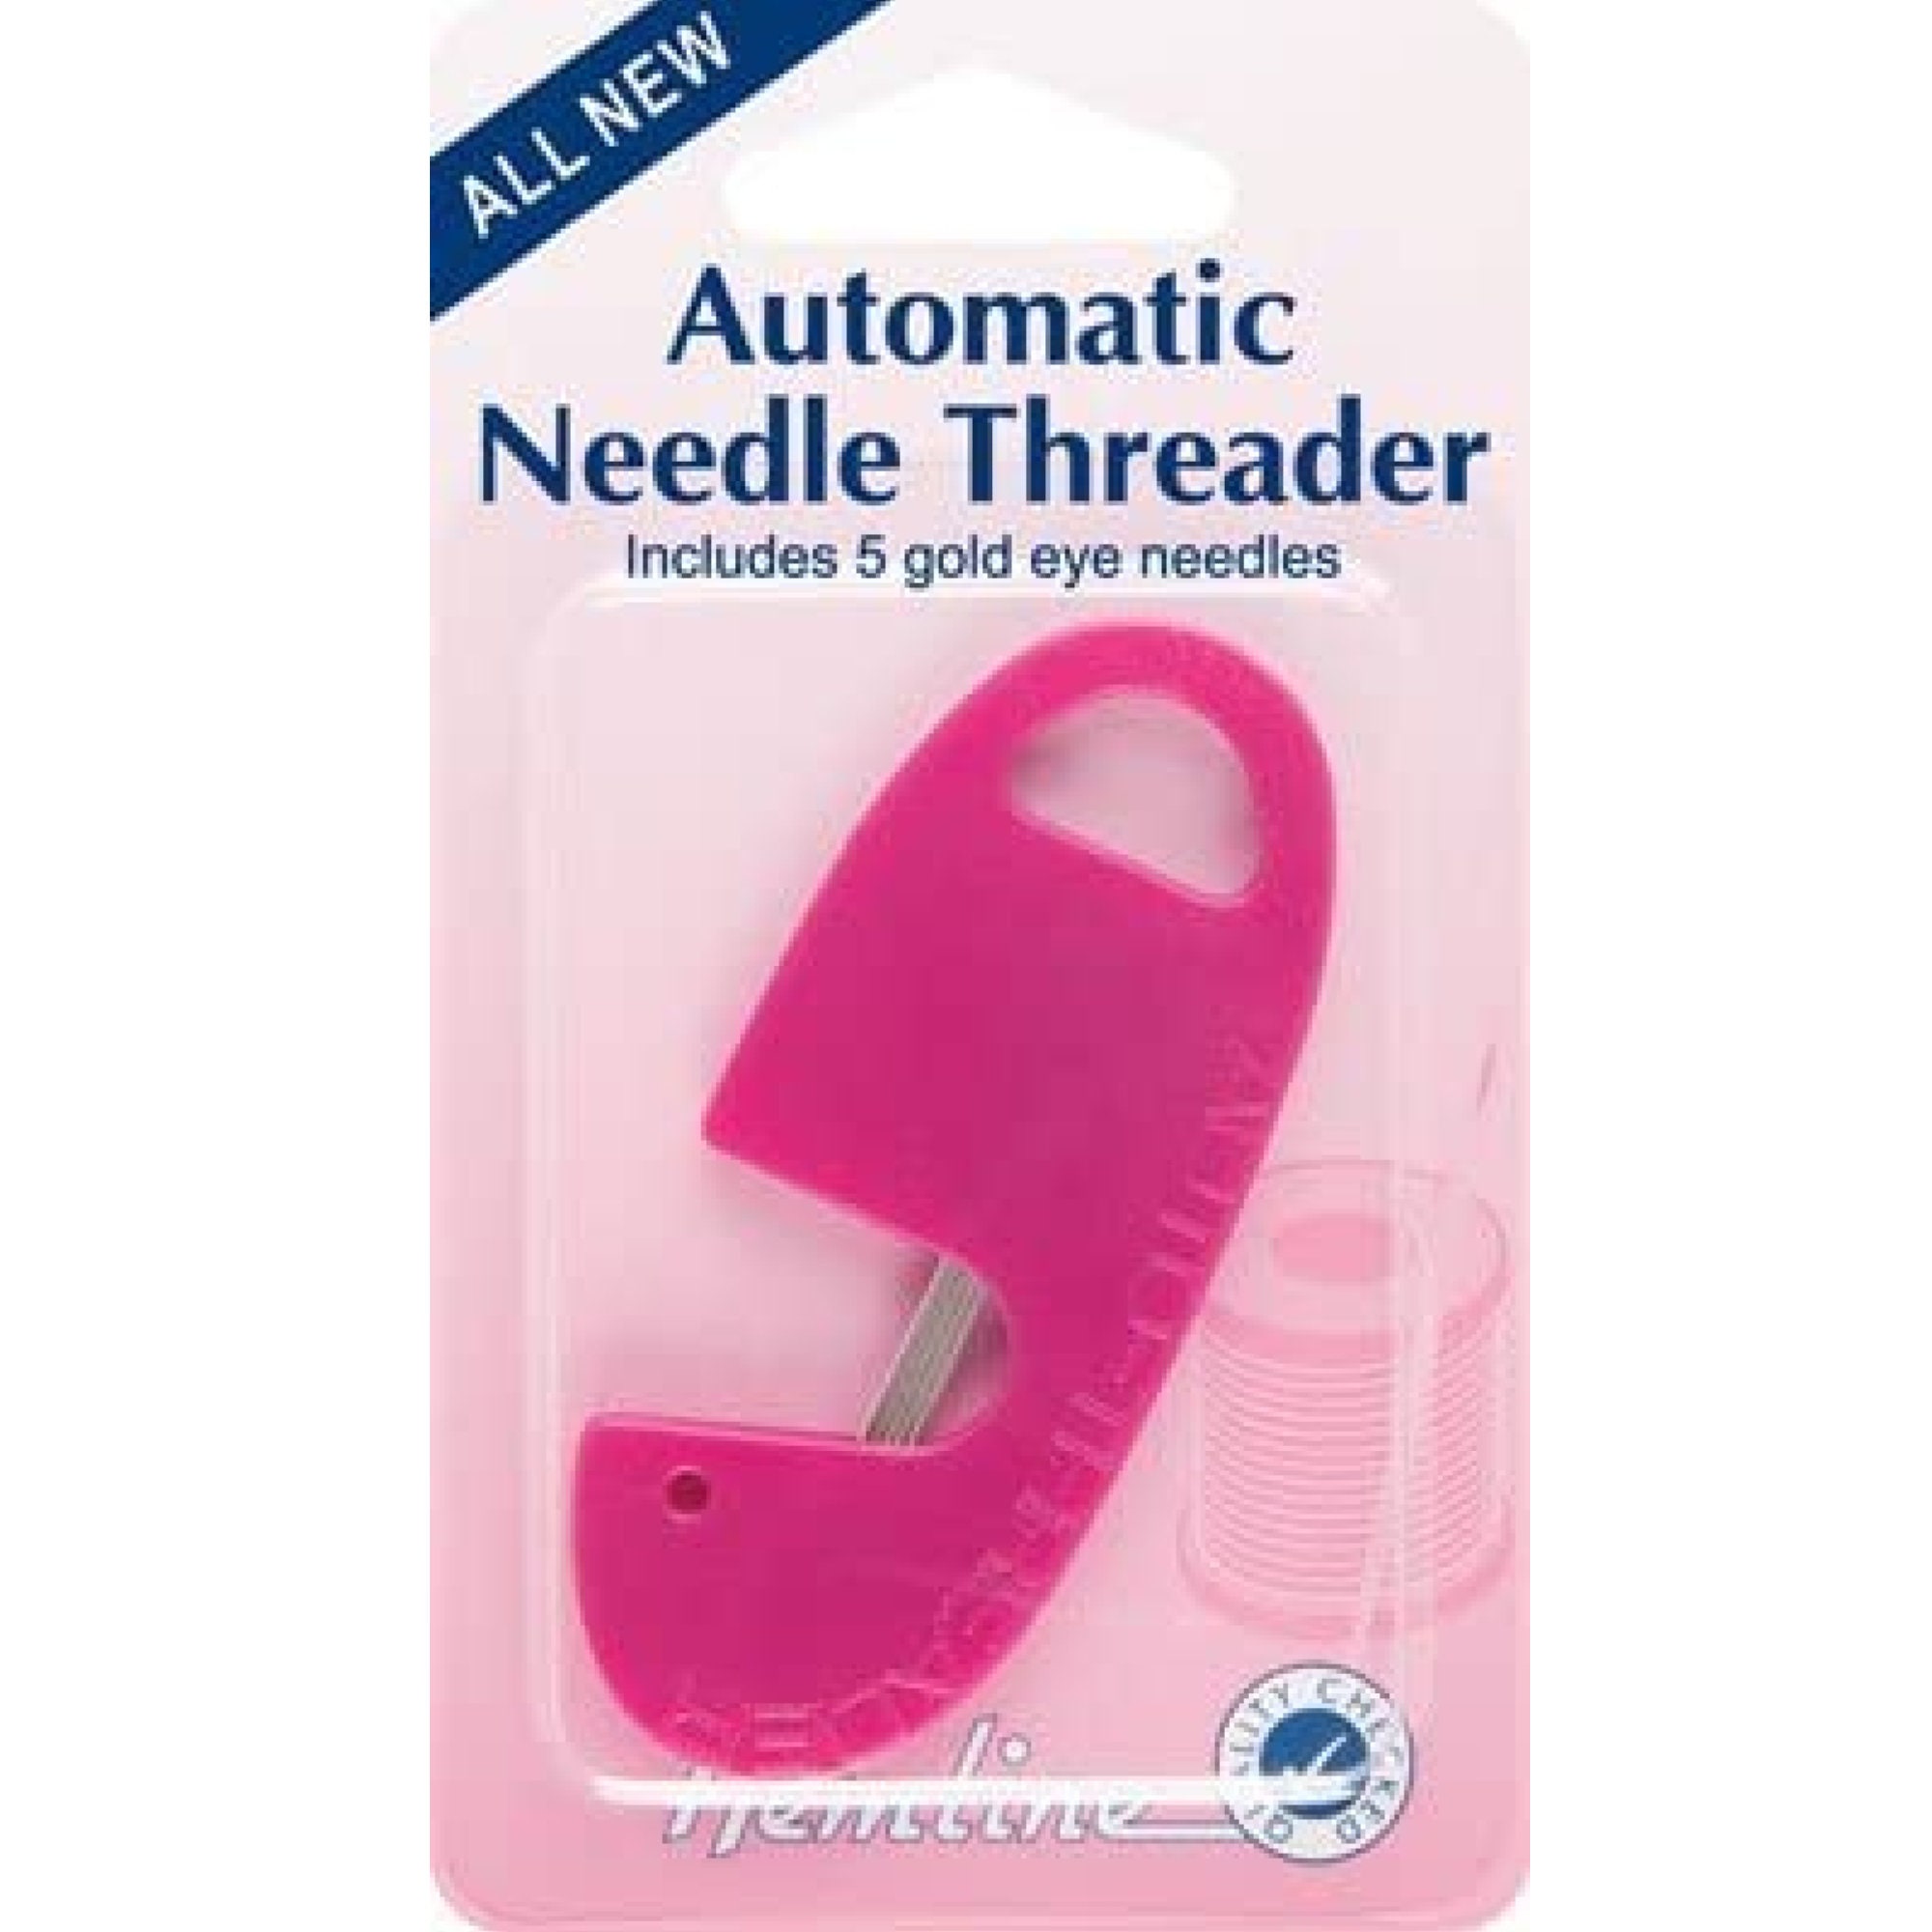 Sewing Machine Needle Threader and Holder 2 in 1 Threading Holdingtool 